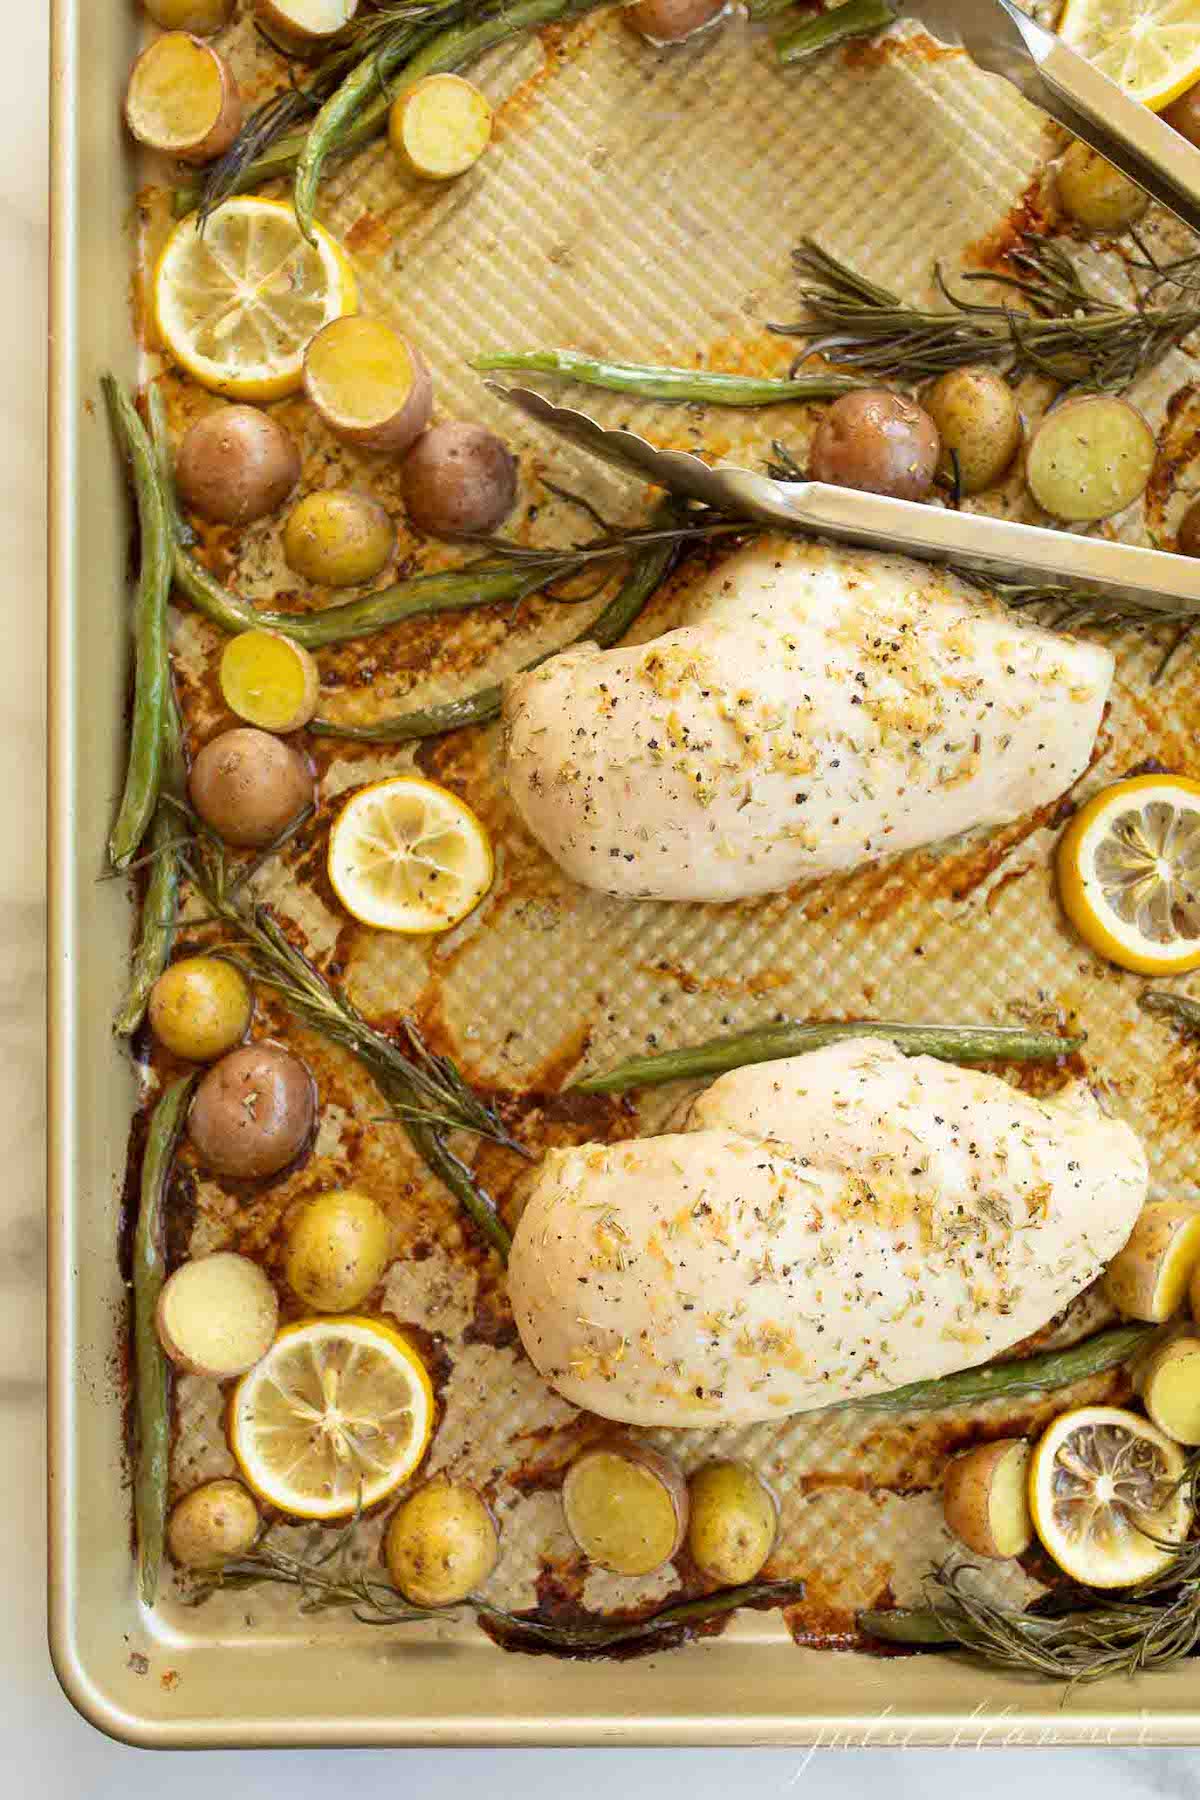 Gold sheet pan filled with baked chicken and veggies such as green beans, baby potatoes and lemon slices.